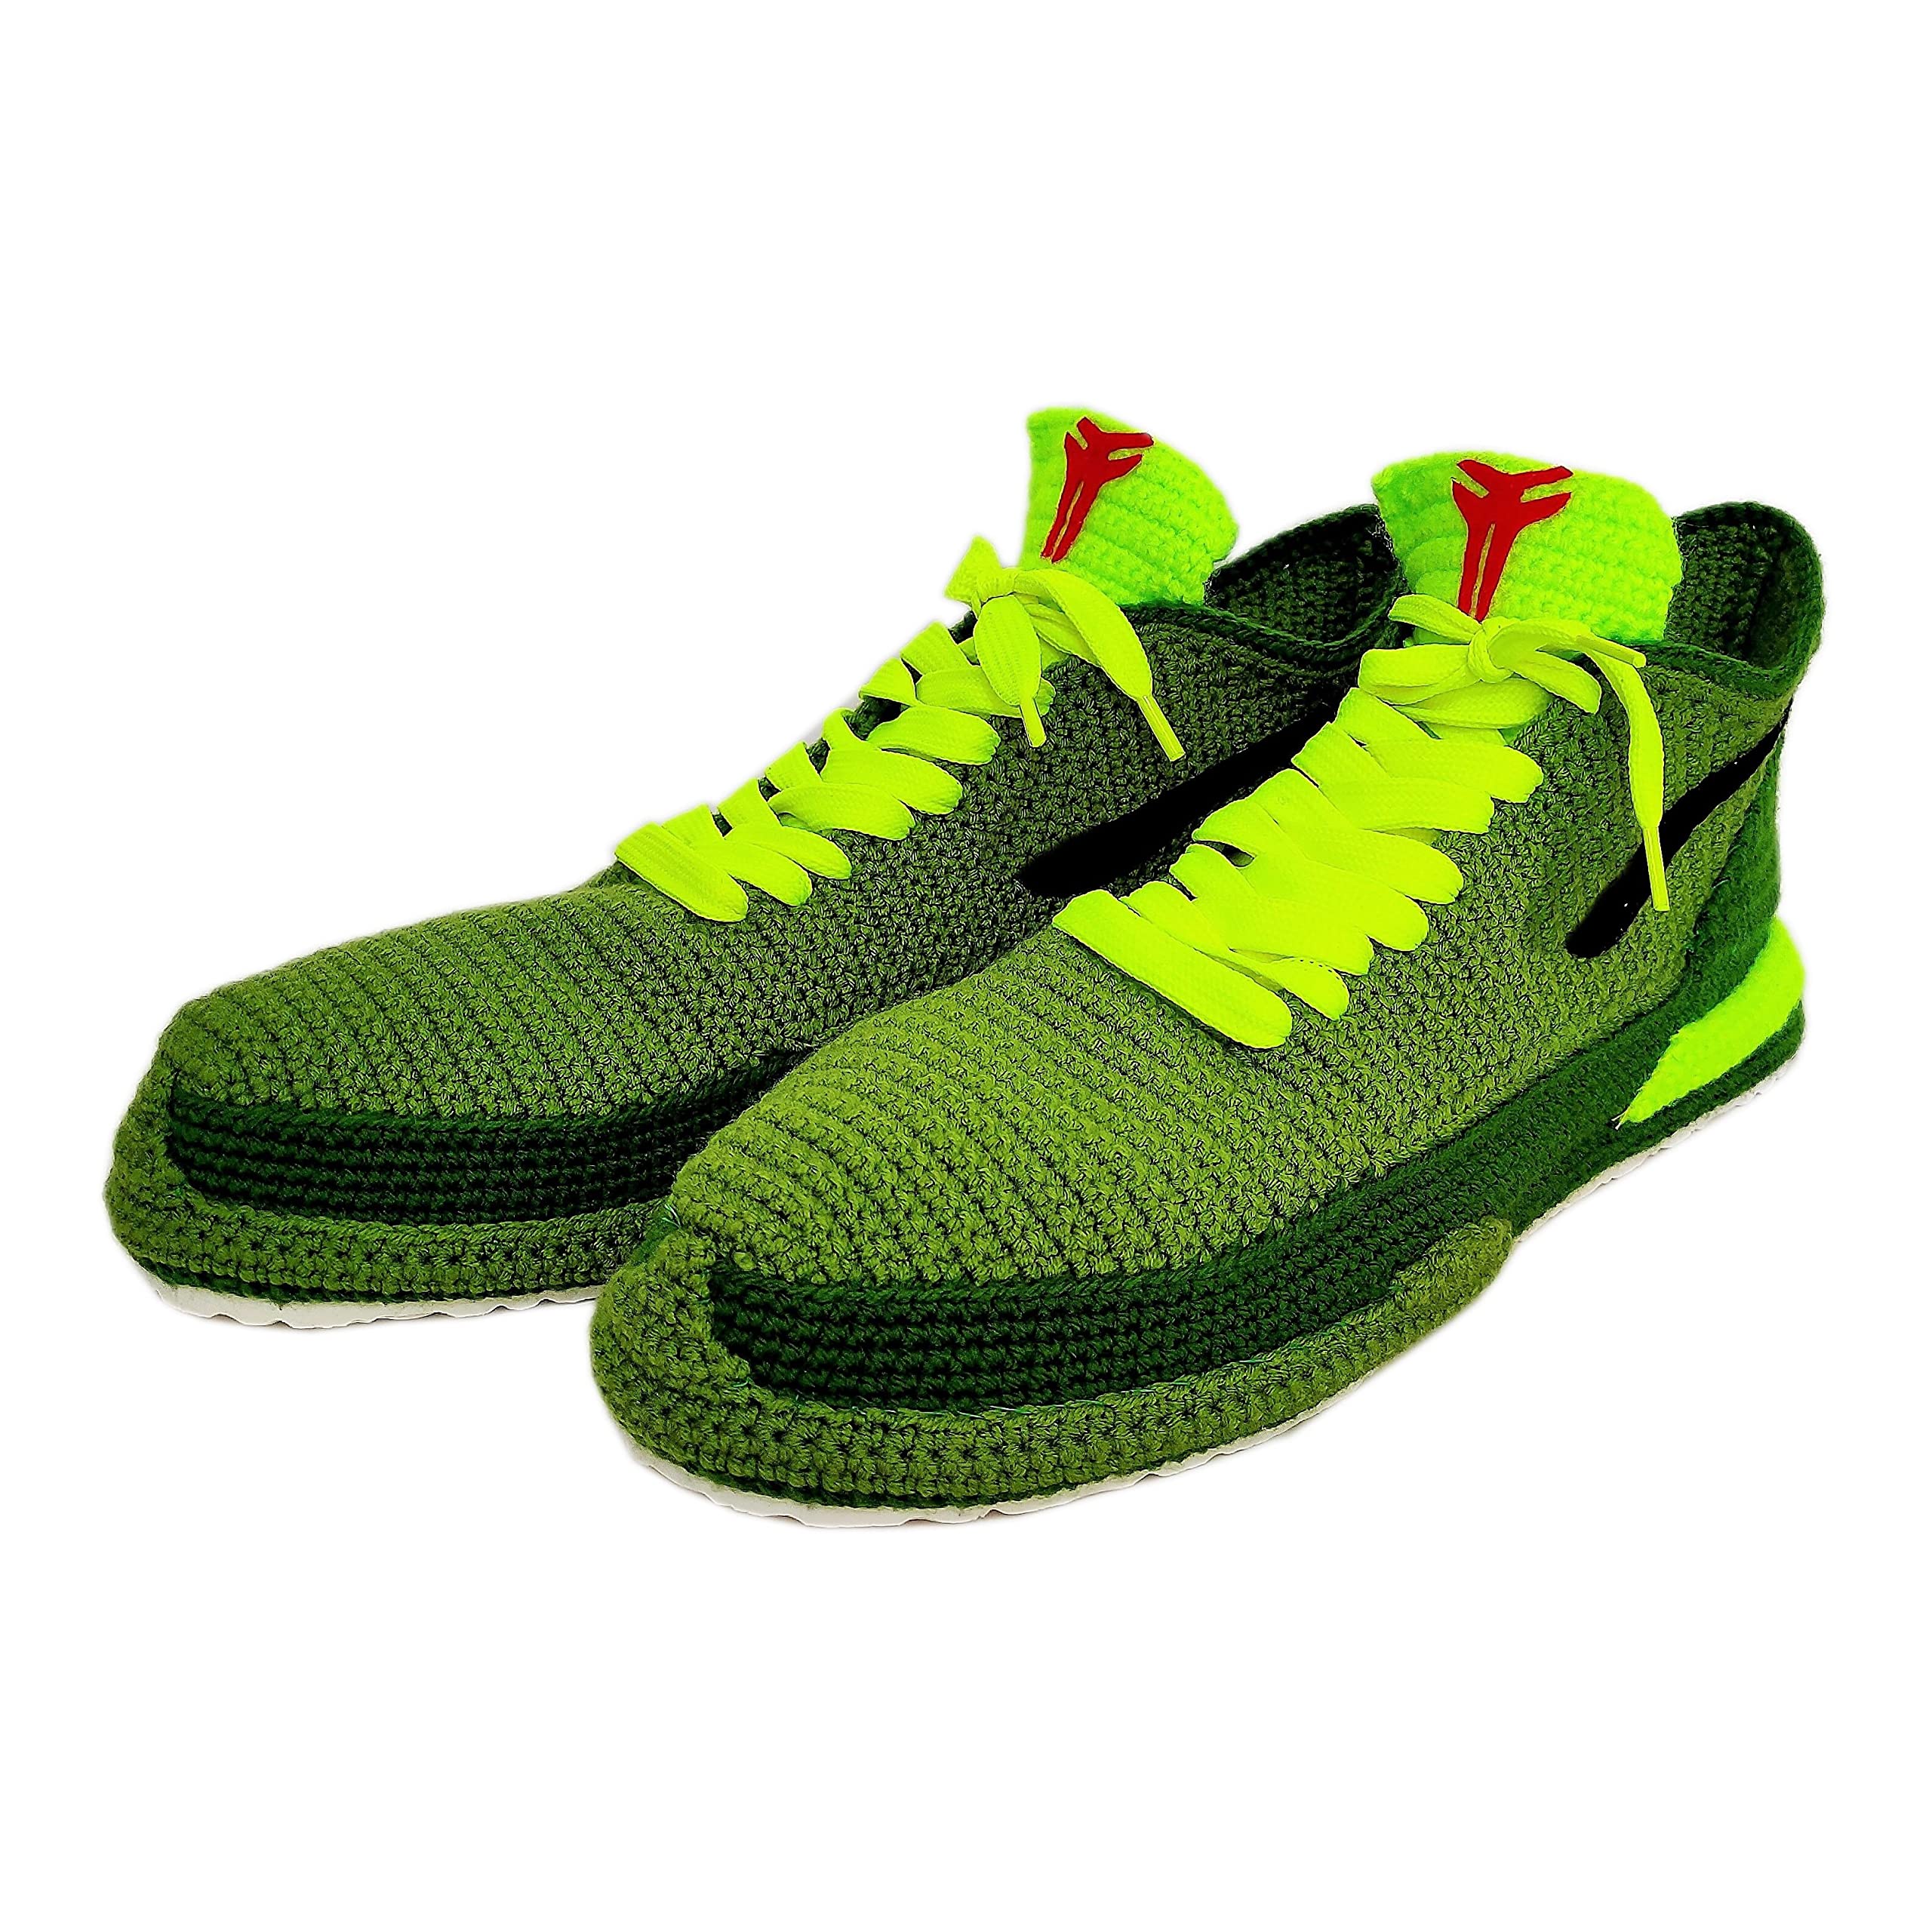 Ko_be Mamba 8 24 Bryant Green Christmas Slippers, Retro Basketball Protro Shoes 2020, Knitted The Grinchs Sneakers, Handmade Custom Home Shoes Slippers (US SIZE - 5 (MEN))